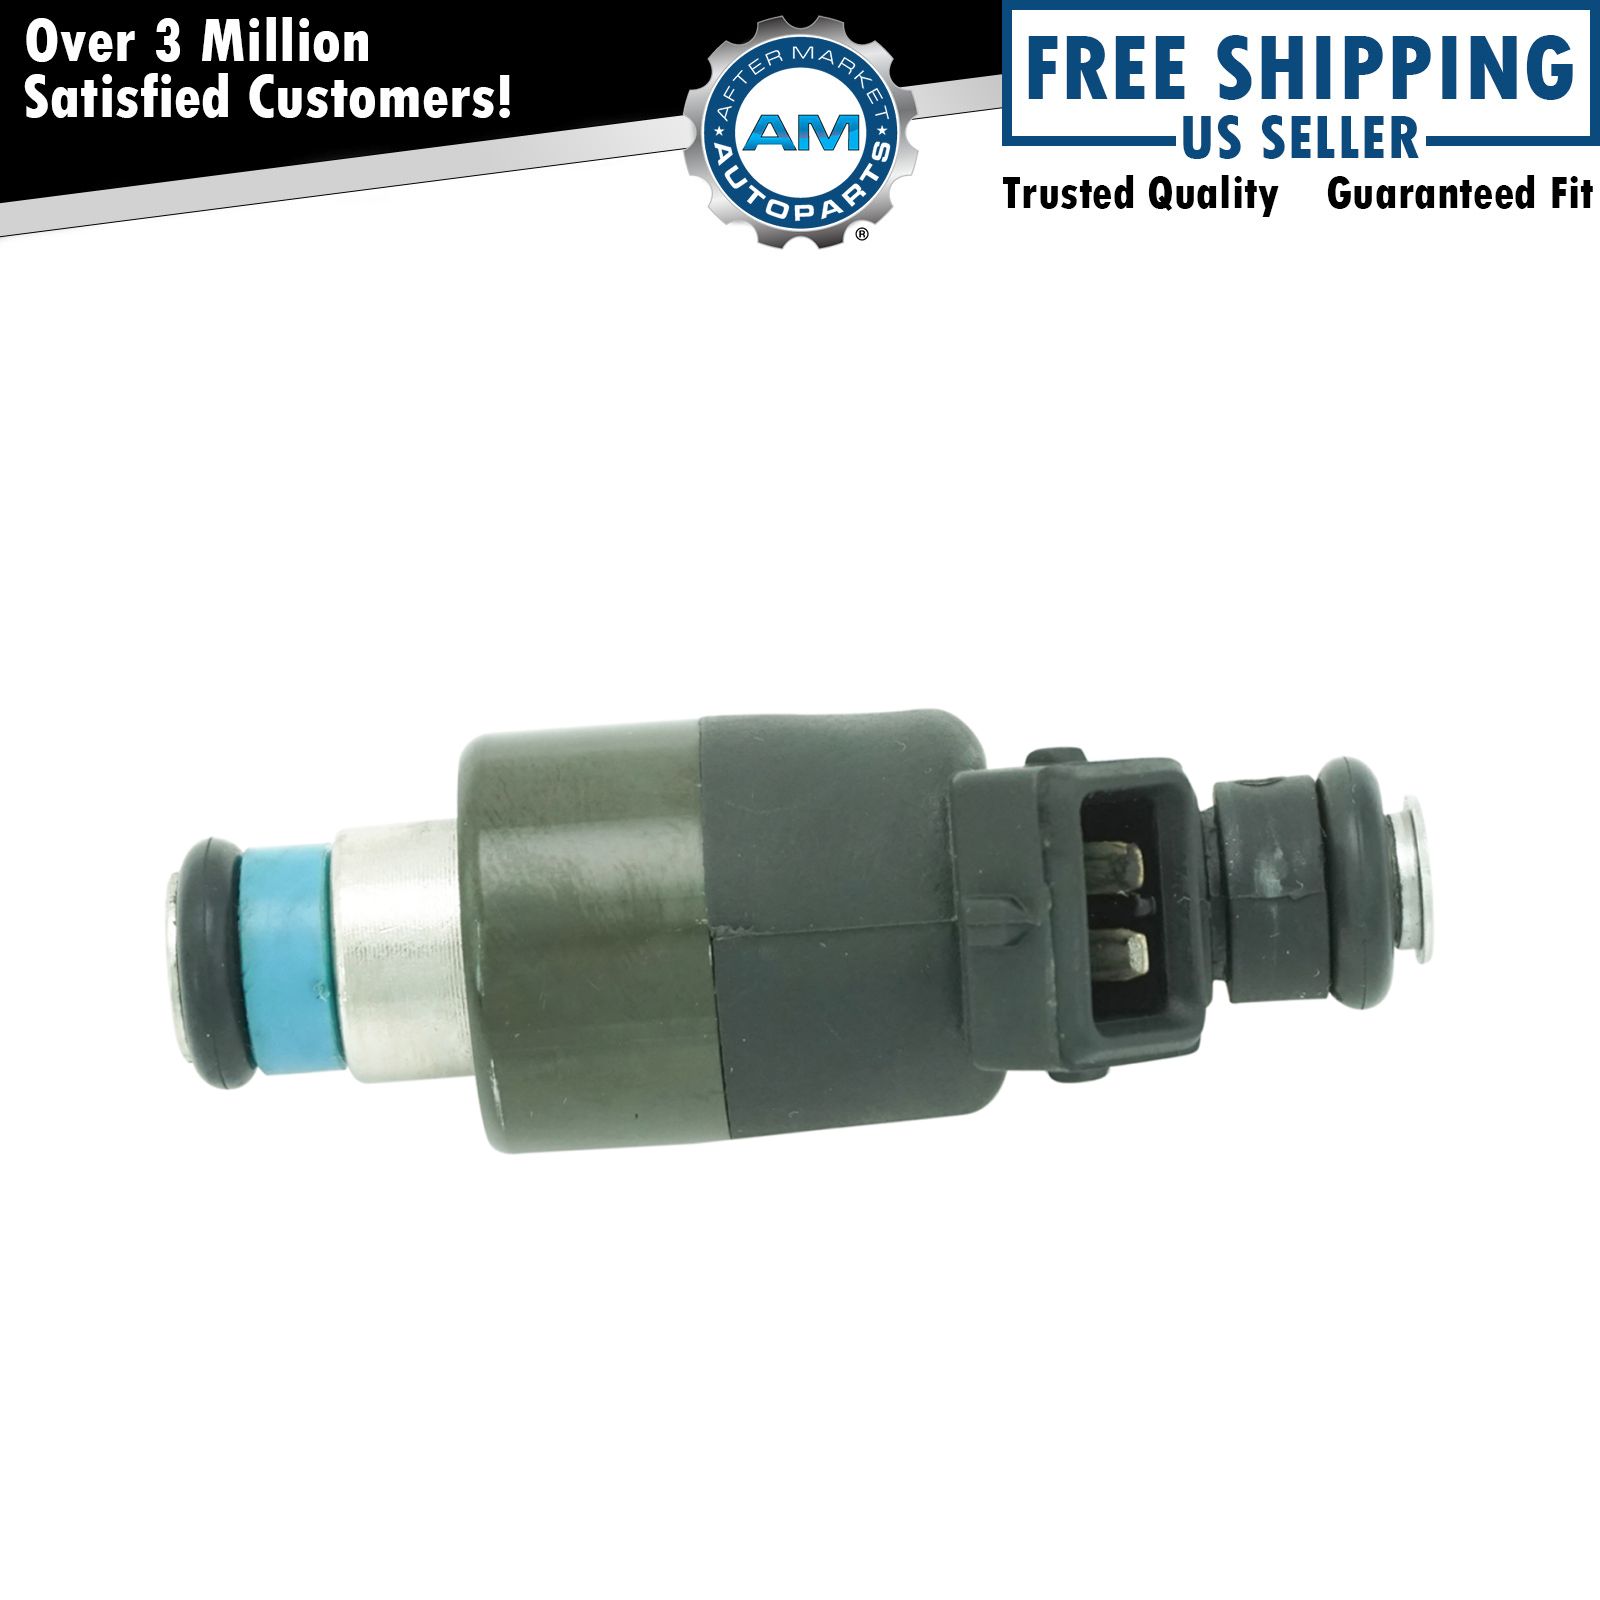 Fuel Injector for Buick Cadillac Chevy Corsica Olds Pontiac Grand Prix